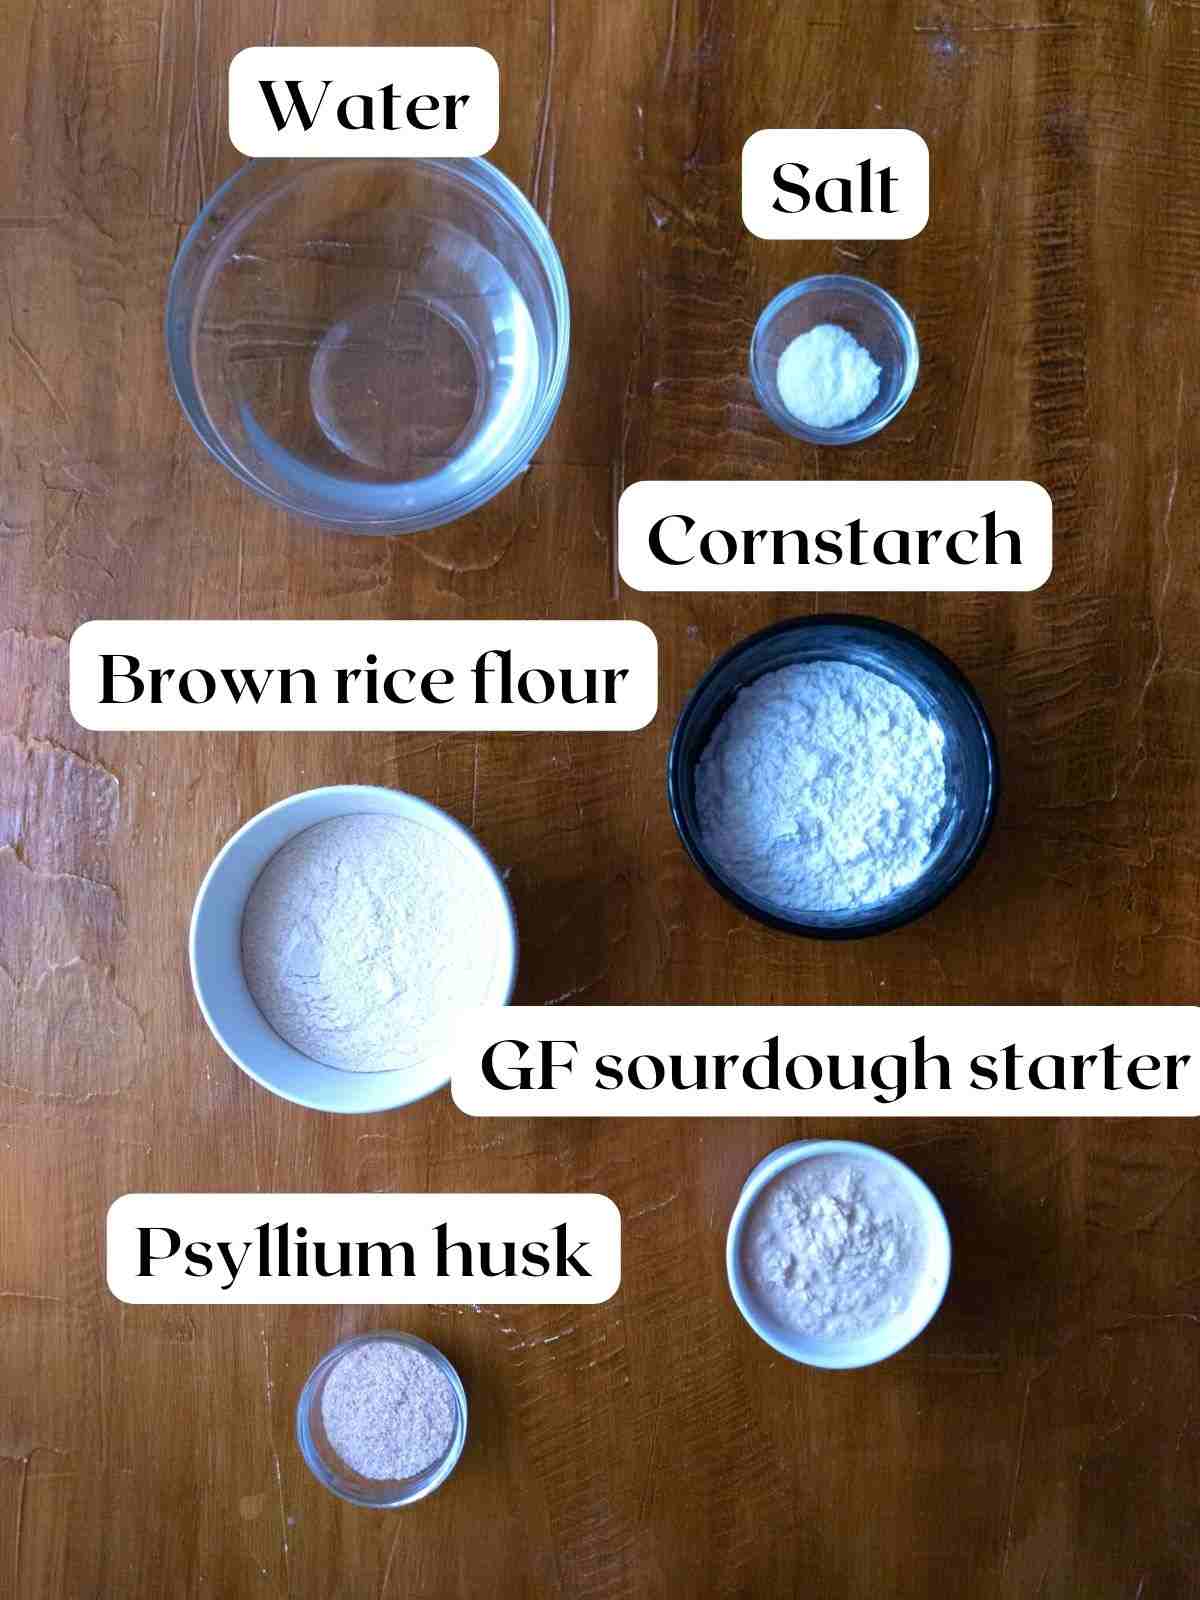 Ingredients on a wooden surface with labels.